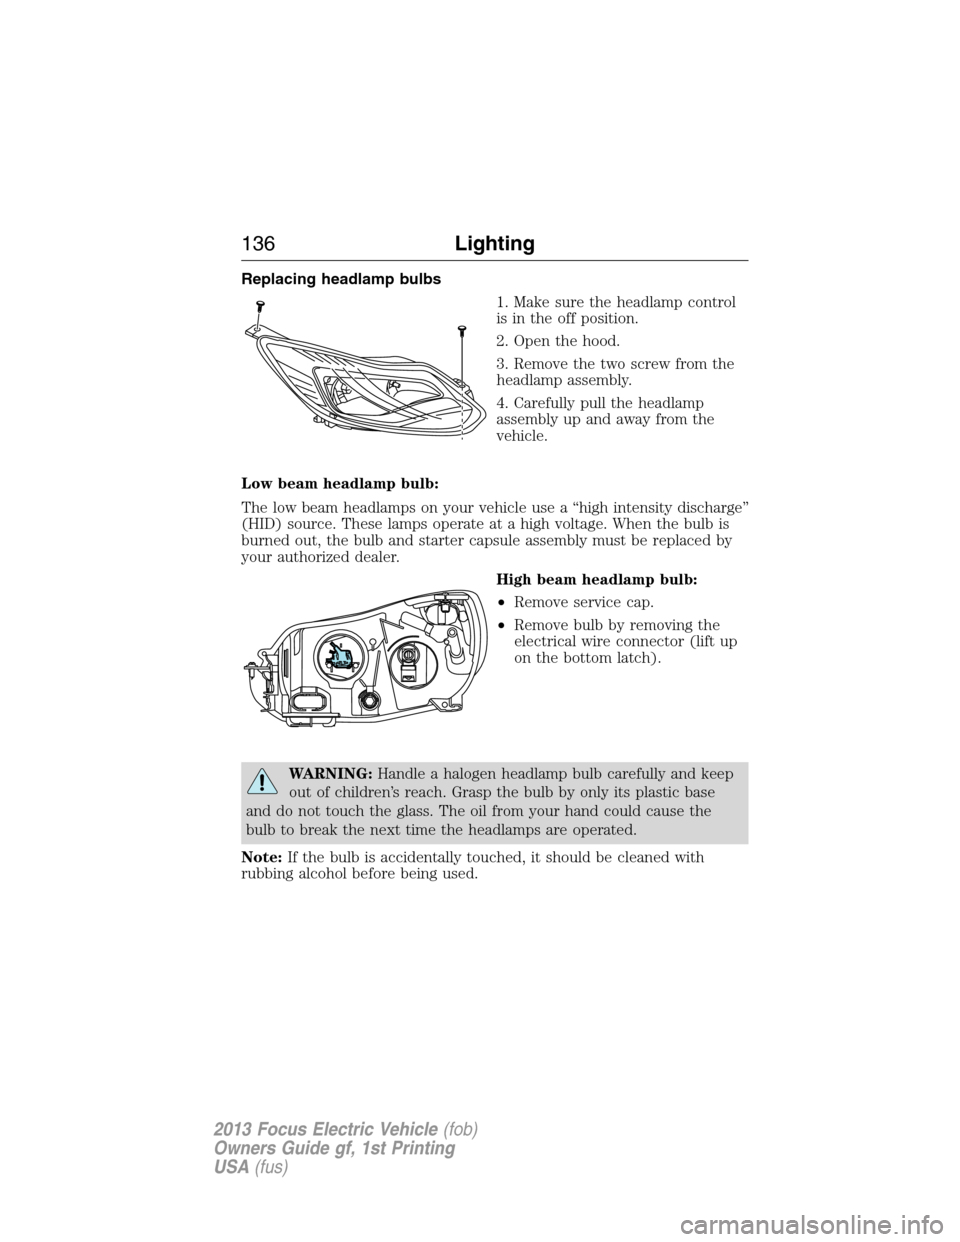 FORD FOCUS ELECTRIC 2013 3.G Owners Manual Replacing headlamp bulbs
1. Make sure the headlamp control
is in the off position.
2. Open the hood.
3. Remove the two screw from the
headlamp assembly.
4. Carefully pull the headlamp
assembly up and 